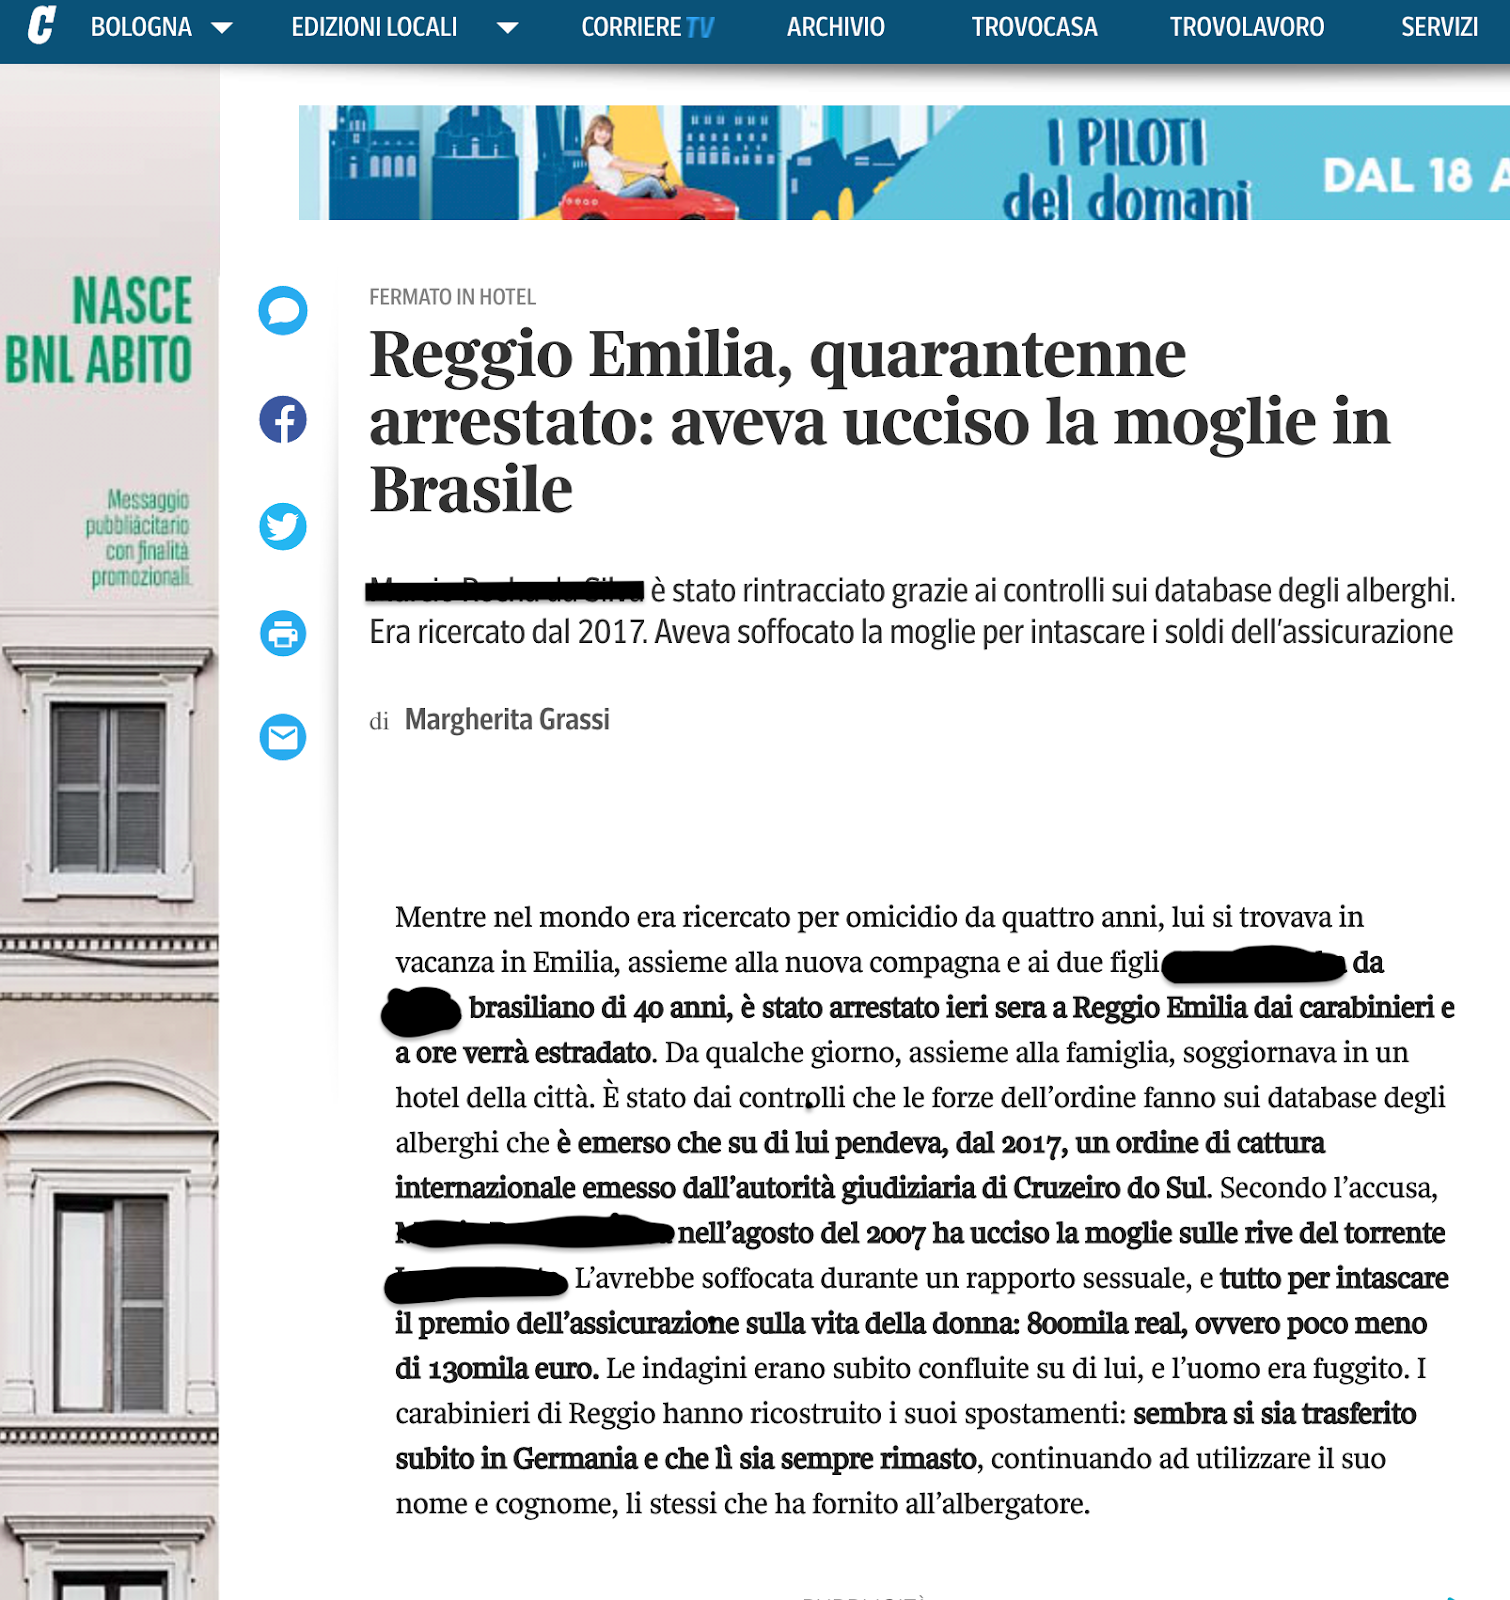 Page of the newspaper 'Il Corriere di Bologna' with the article in question.